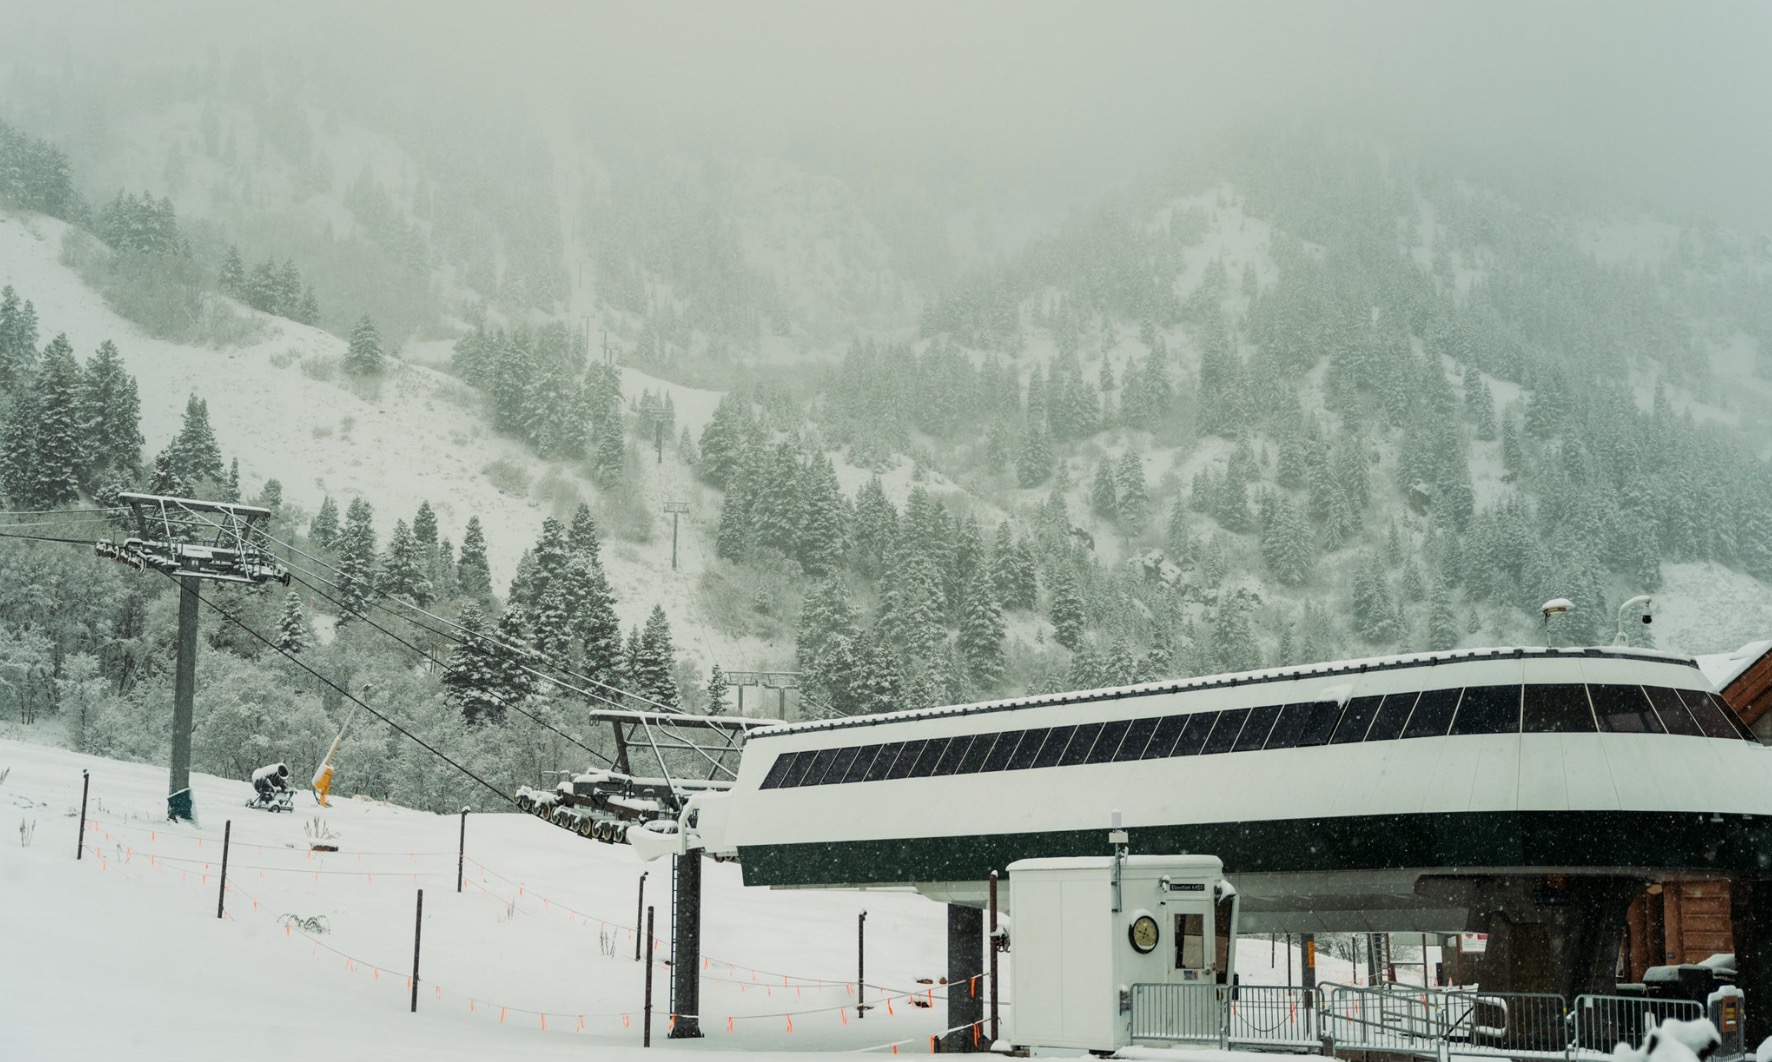 Snowbasin Resort Announces Its Earliest Opening Ever